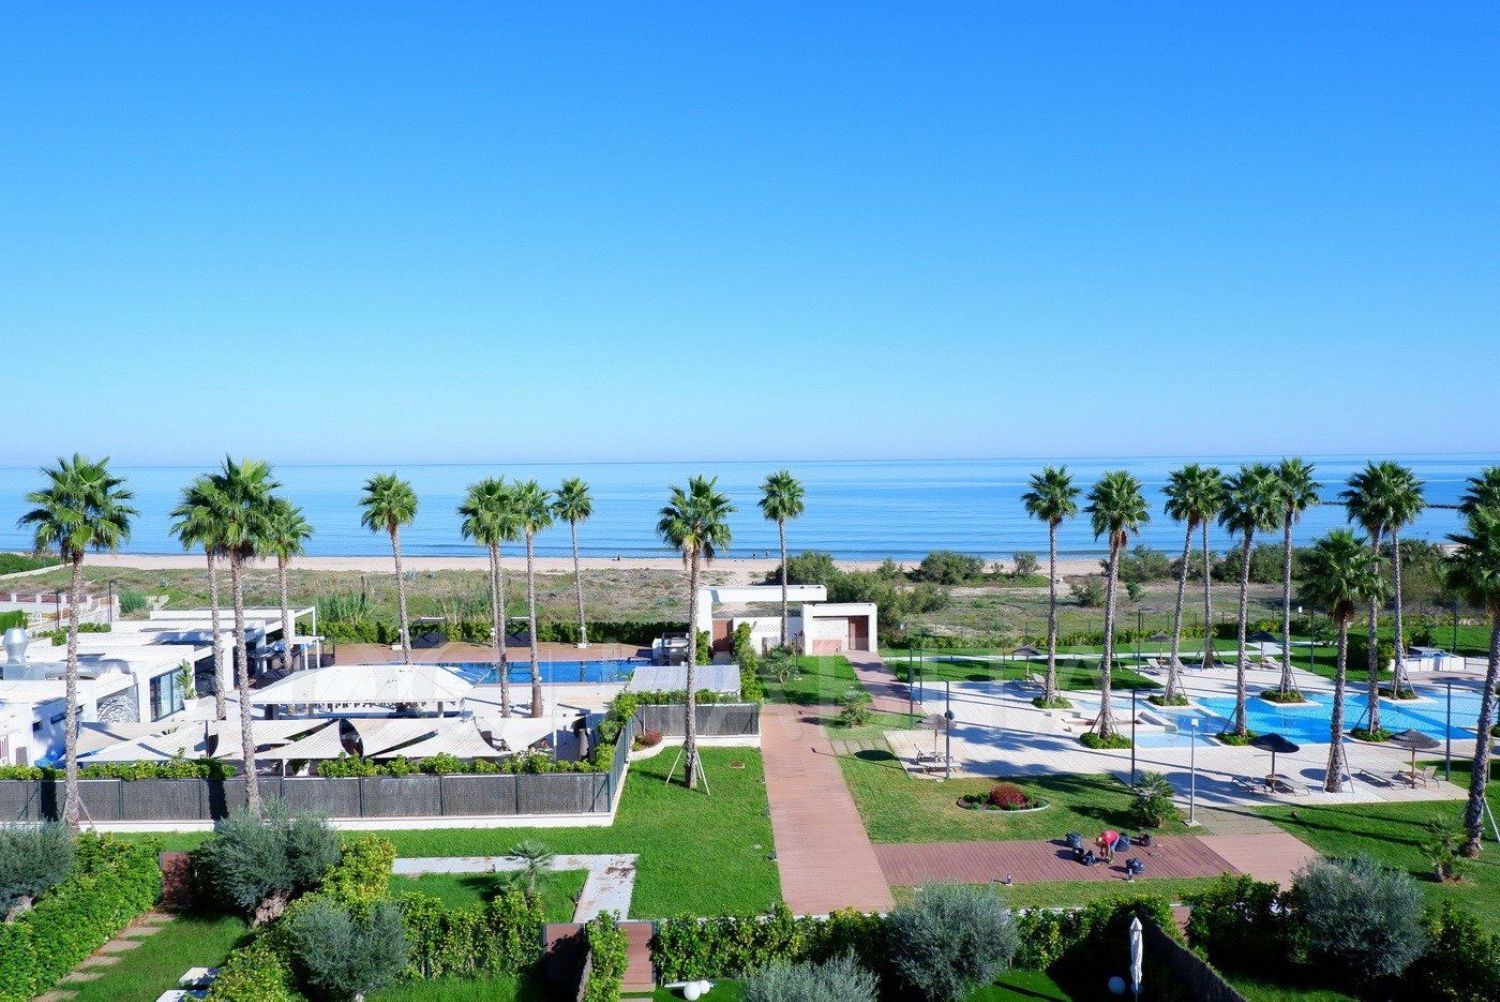 Duplex Penthouse for sale on the seafront on Calle les Marines, in Dénia